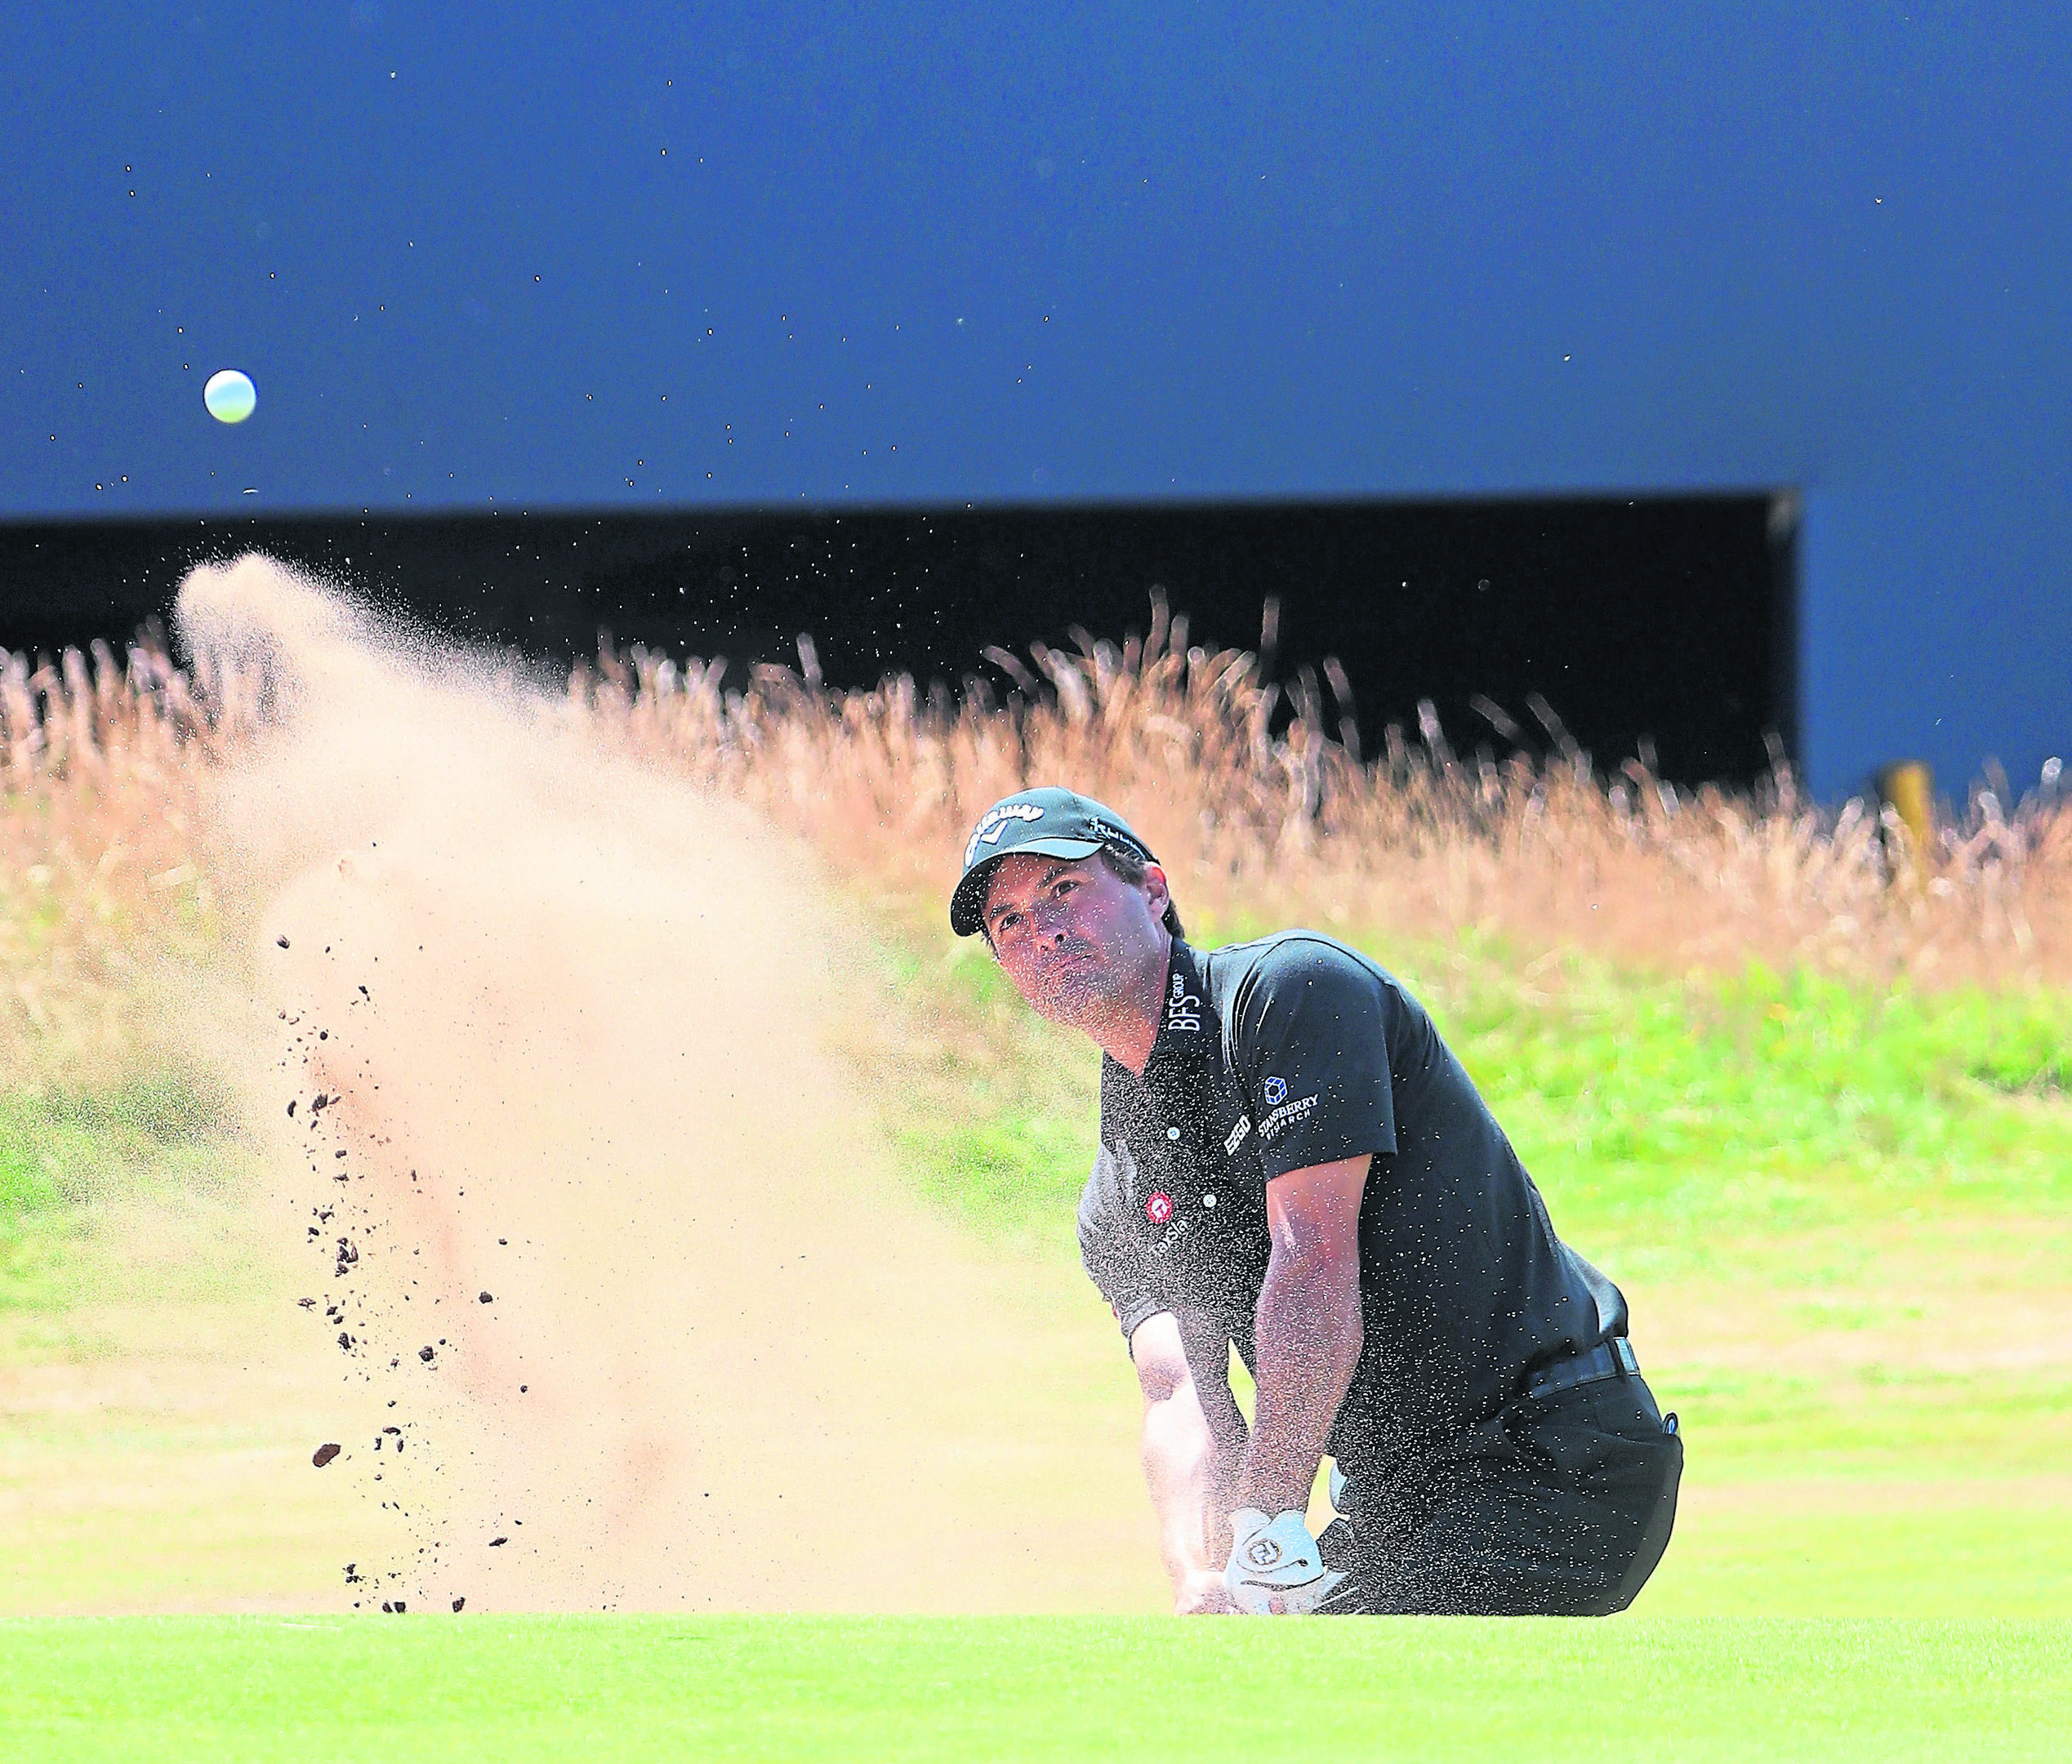 Kevin Kisner hits a bunker shot on the 18th hole at the 147th Open Championship at Carnoustie Golf Club.